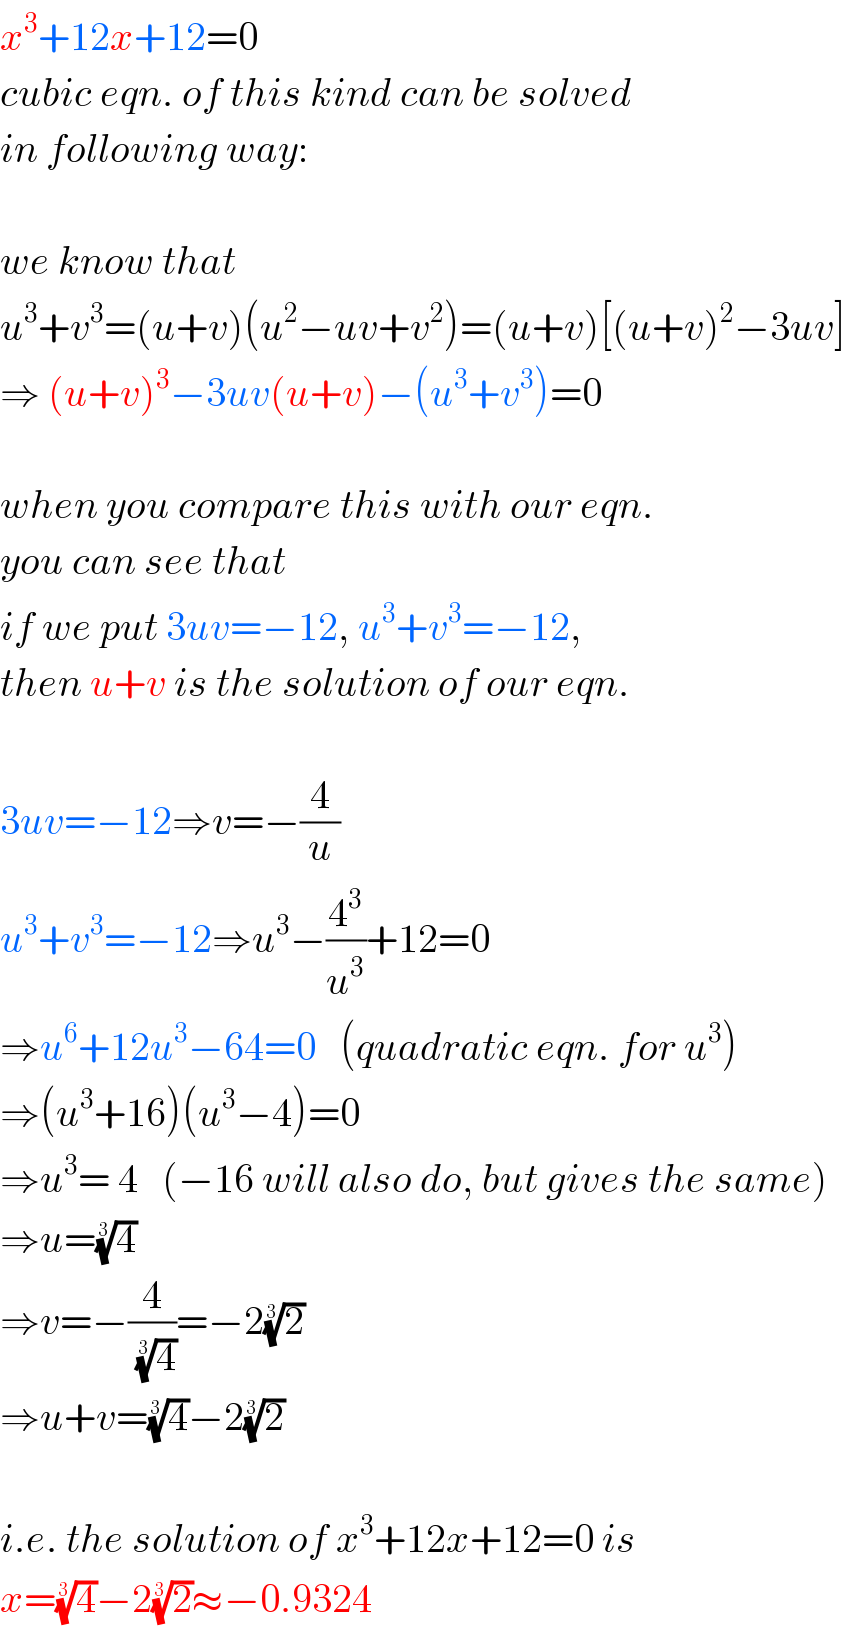 x^3 +12x+12=0  cubic eqn. of this kind can be solved  in following way:    we know that  u^3 +v^3 =(u+v)(u^2 −uv+v^2 )=(u+v)[(u+v)^2 −3uv]  ⇒ (u+v)^3 −3uv(u+v)−(u^3 +v^3 )=0    when you compare this with our eqn.  you can see that   if we put 3uv=−12, u^3 +v^3 =−12,  then u+v is the solution of our eqn.    3uv=−12⇒v=−(4/u)  u^3 +v^3 =−12⇒u^3 −(4^3 /u^3 )+12=0  ⇒u^6 +12u^3 −64=0   (quadratic eqn. for u^3 )  ⇒(u^3 +16)(u^3 −4)=0  ⇒u^3 = 4   (−16 will also do, but gives the same)  ⇒u=(4)^(1/3)   ⇒v=−(4/(4)^(1/3) )=−2(2)^(1/3)   ⇒u+v=(4)^(1/3) −2(2)^(1/3)     i.e. the solution of x^3 +12x+12=0 is  x=(4)^(1/3) −2(2)^(1/3) ≈−0.9324  